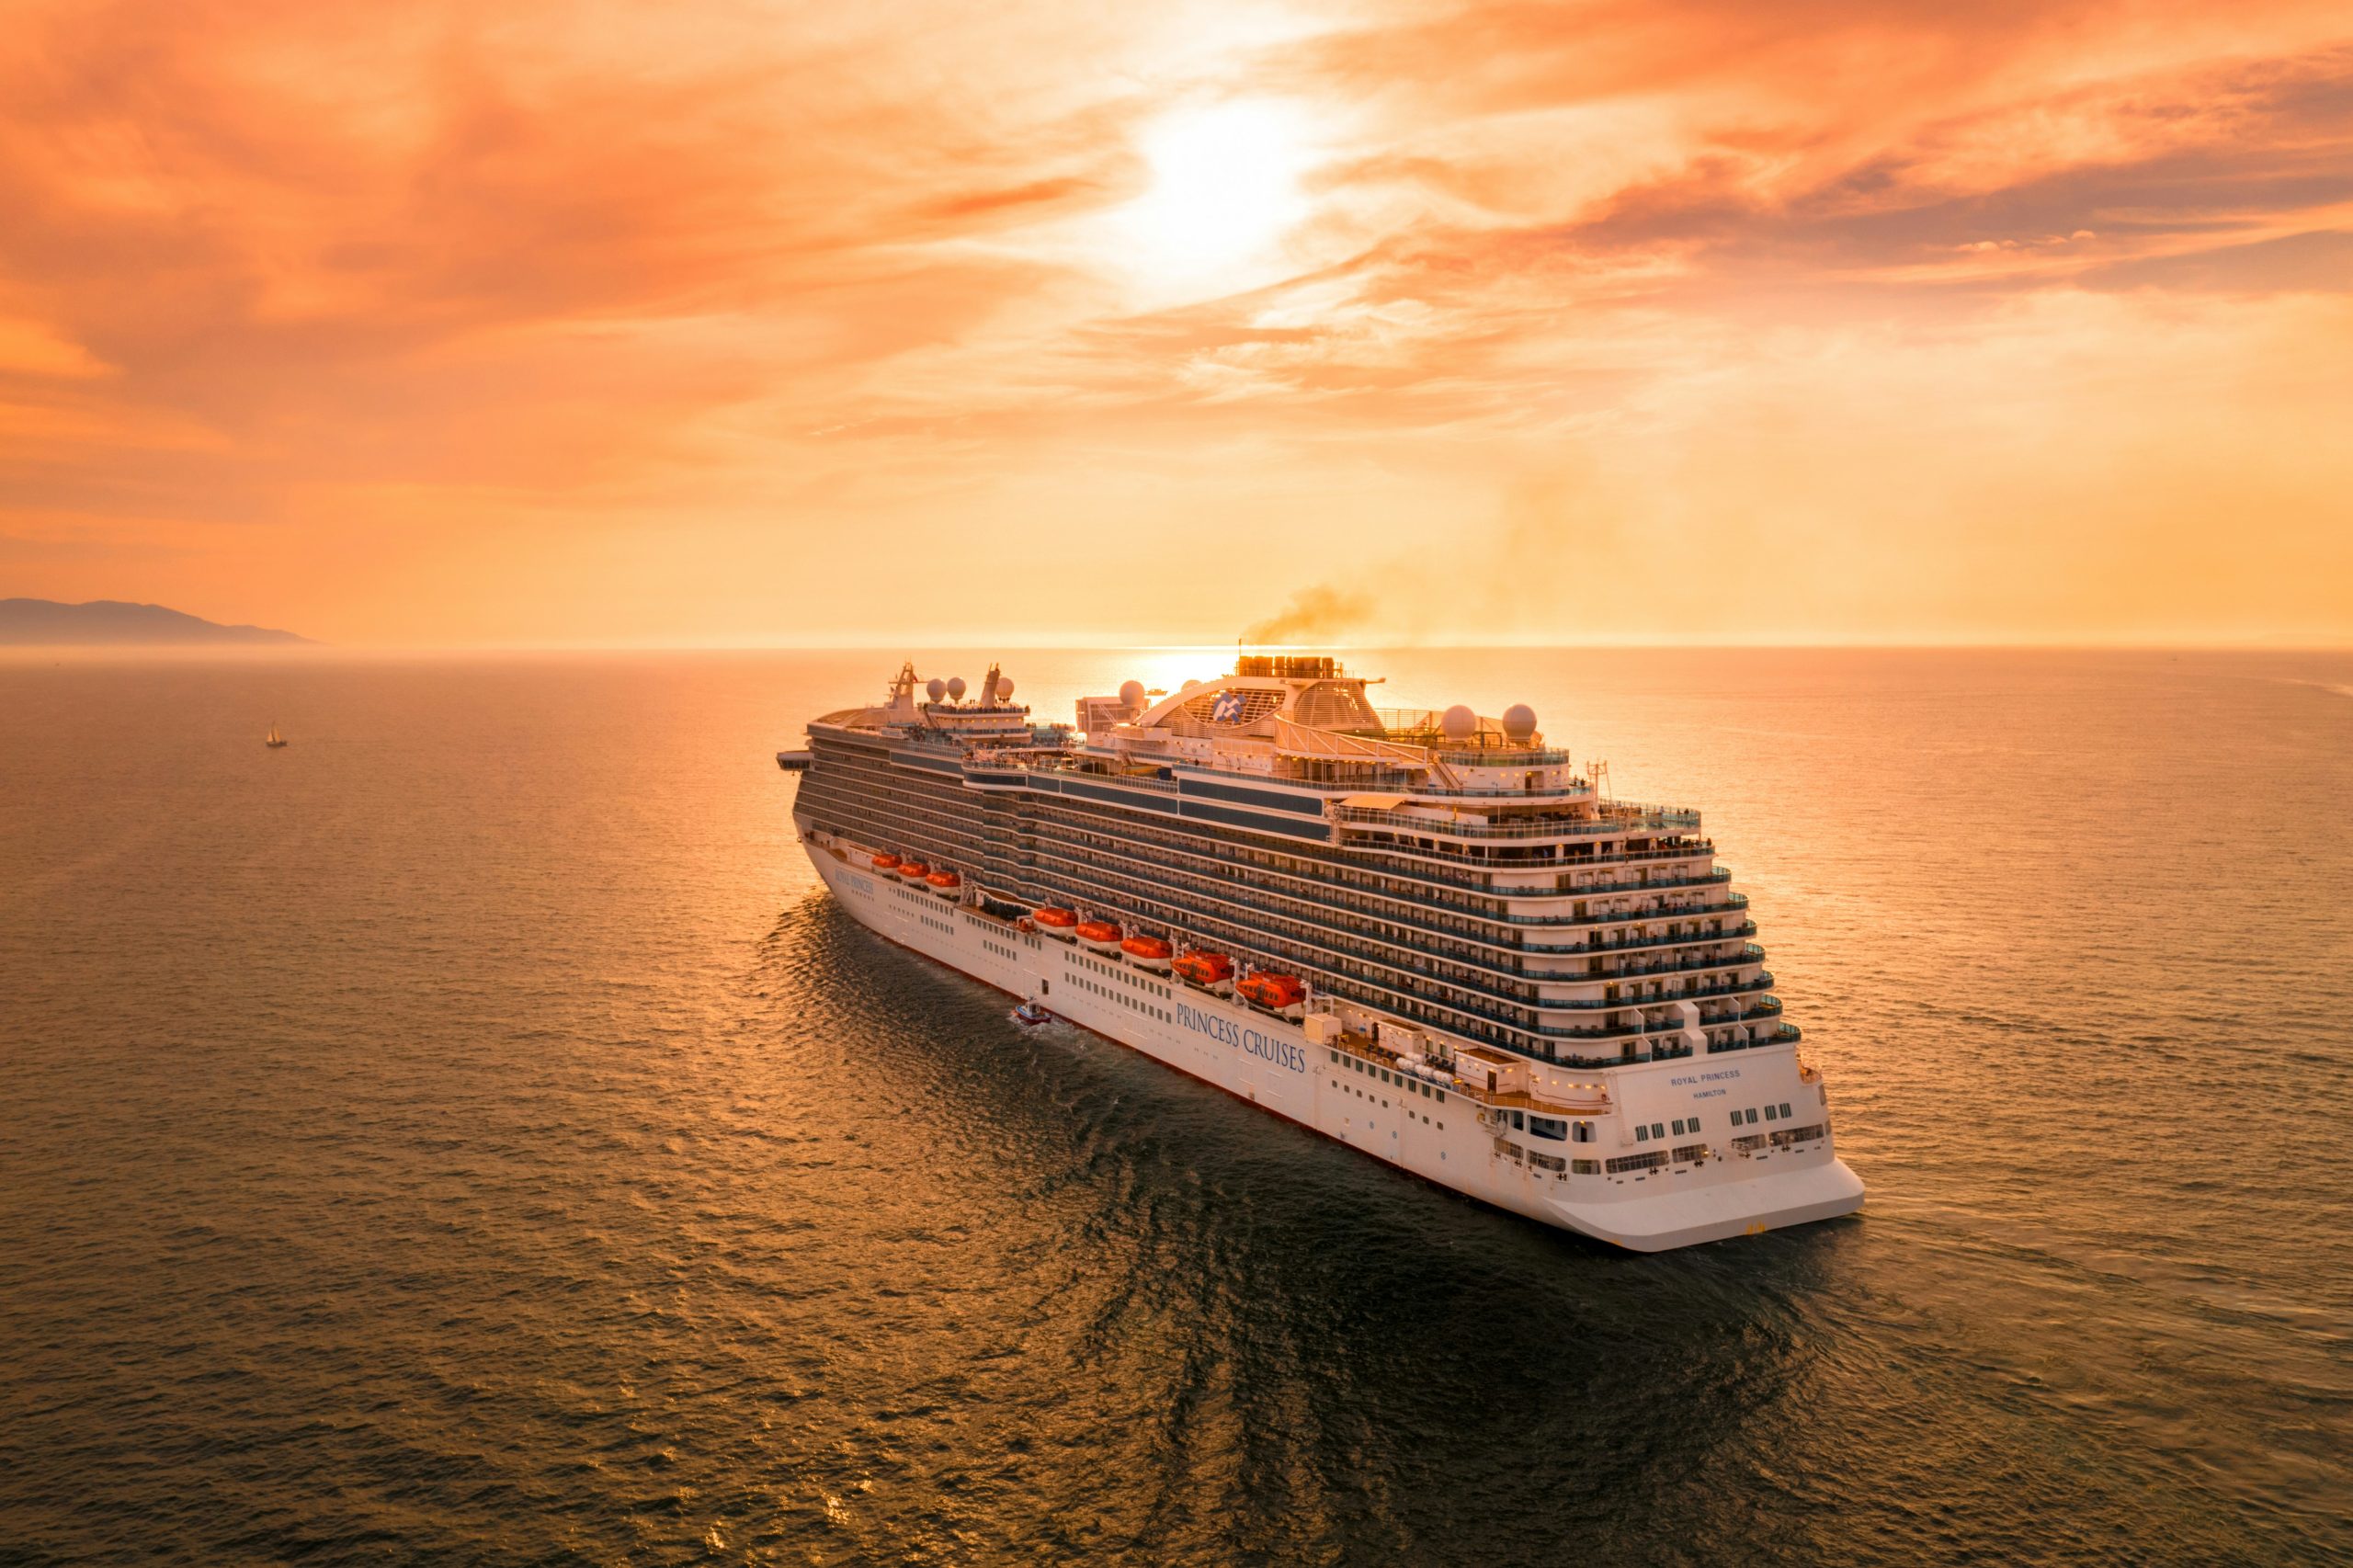 discover a variety of cruise options for your next vacation. from luxury liners to adventure expeditions, find the perfect cruise for your travel style.